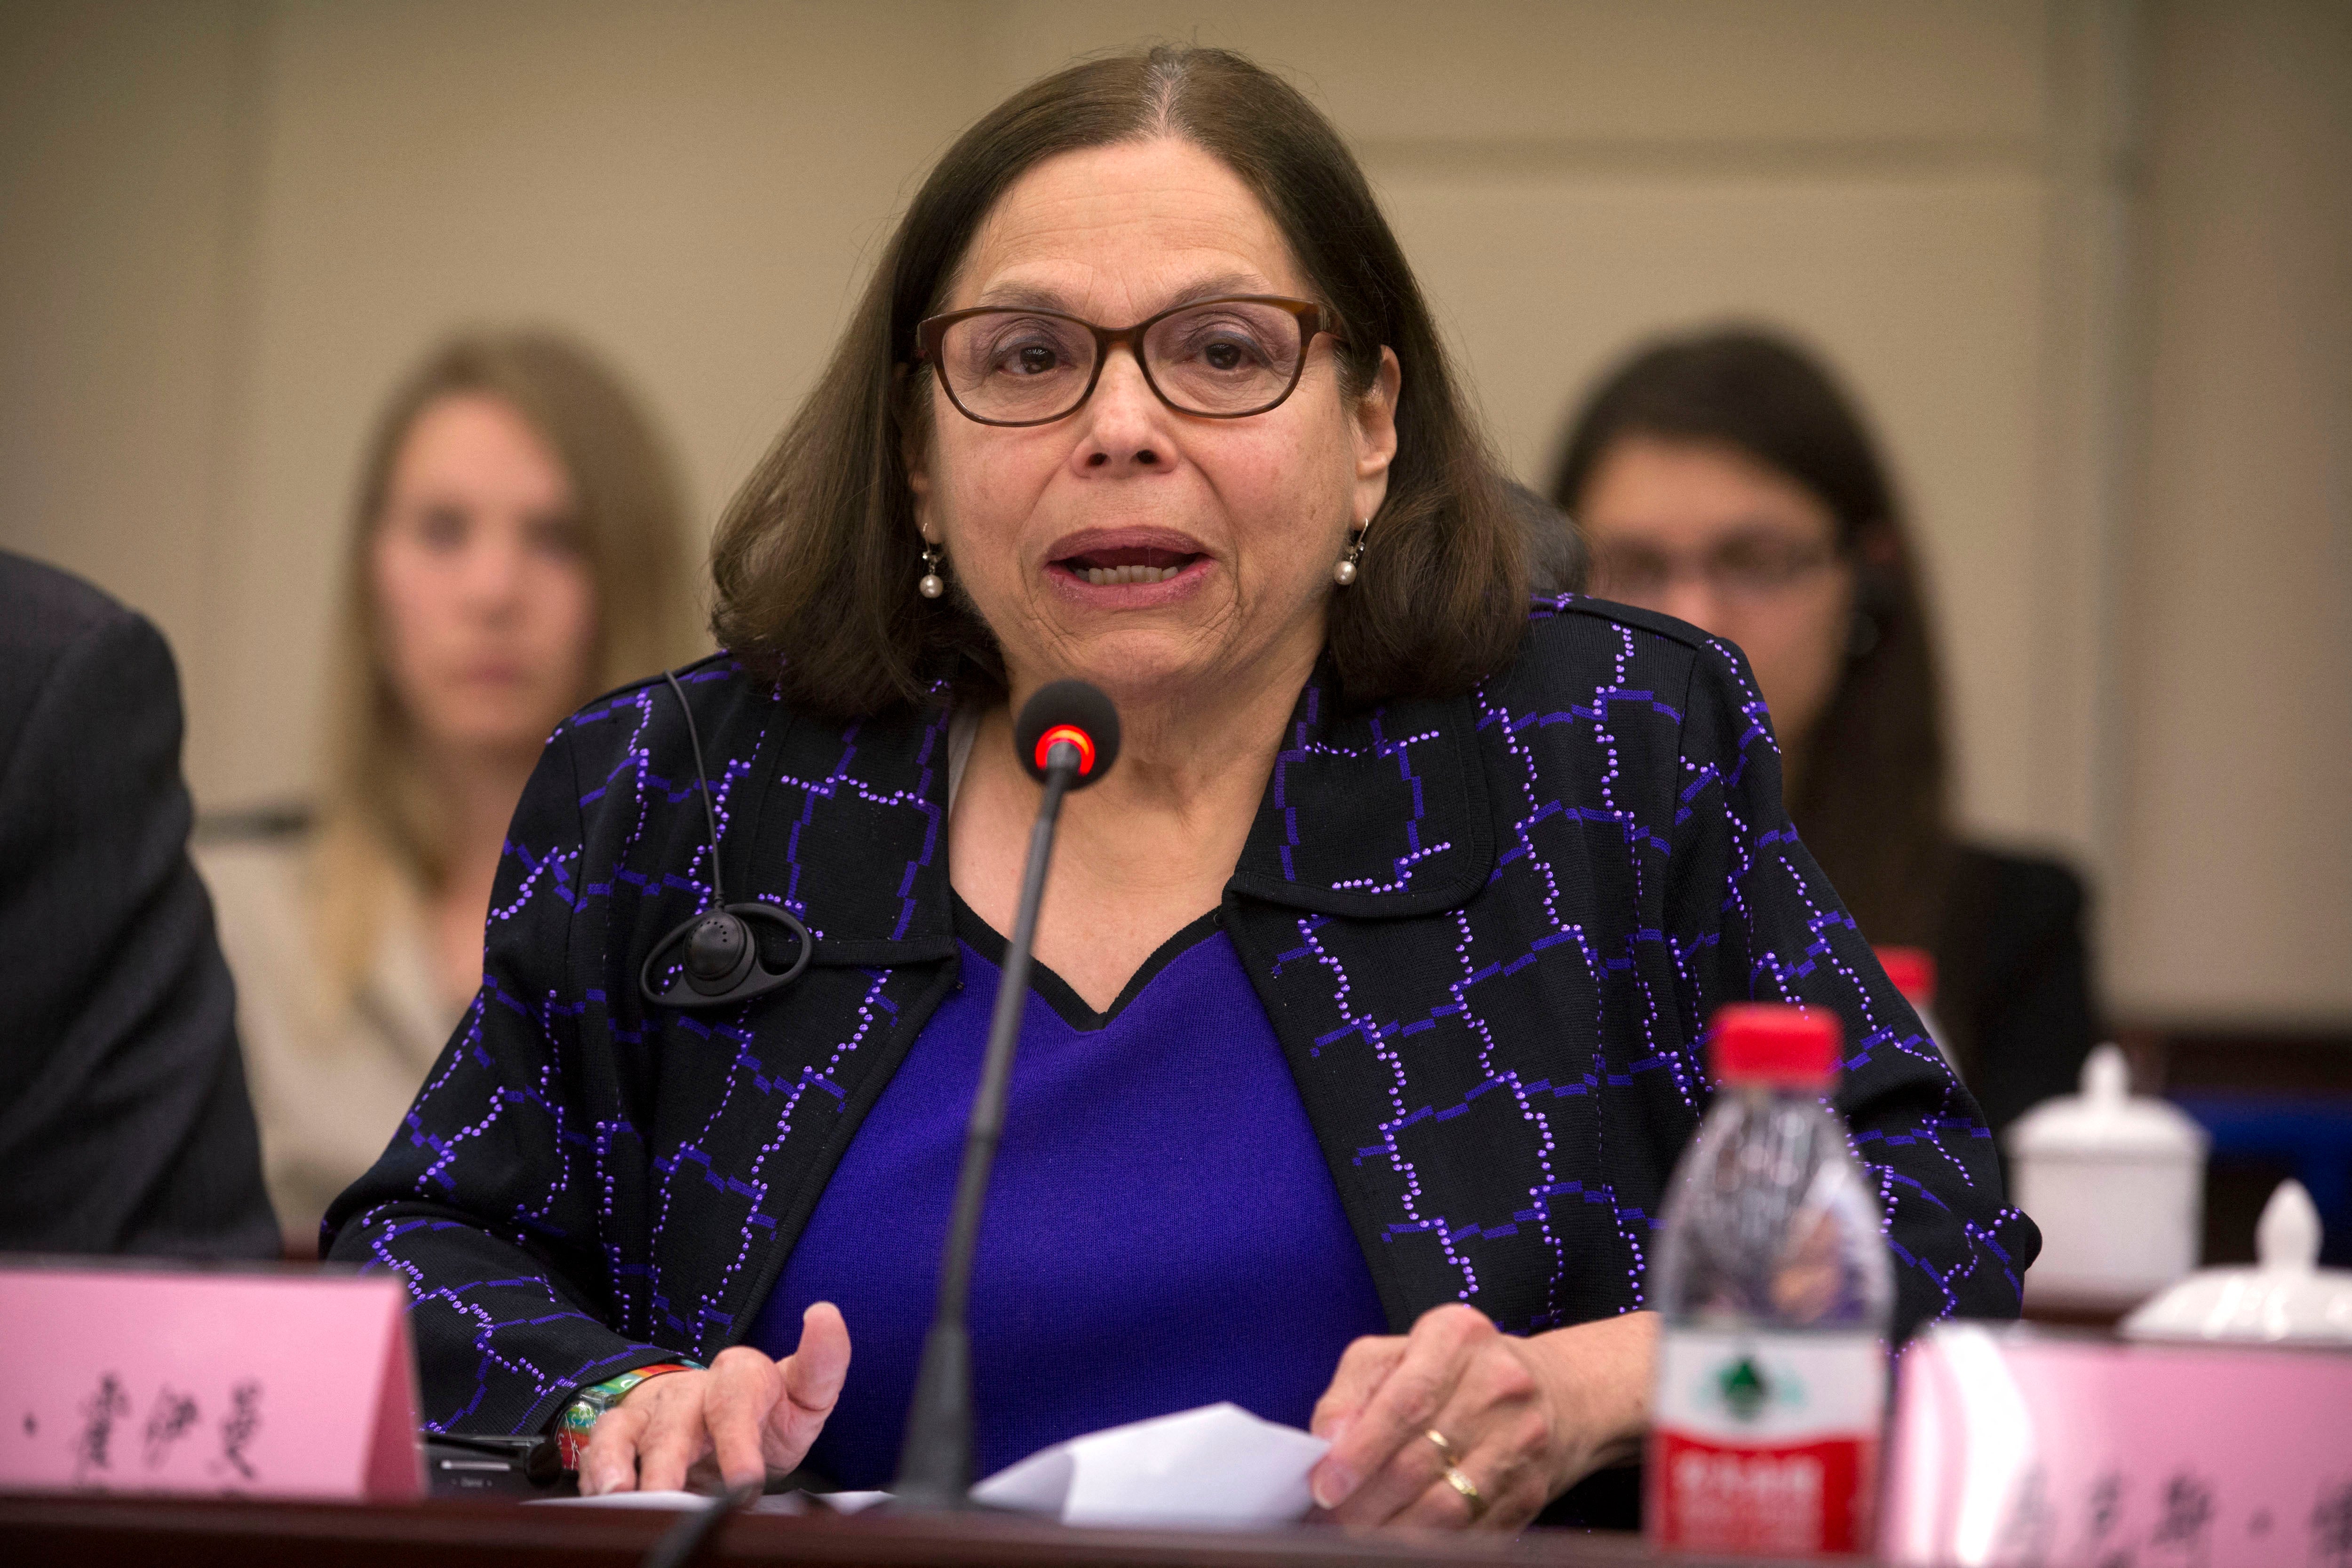 Judith Heumann, special advisor for international disability rights at the US Department of State, speaks at the opening session of the China-US Coordination Meeting on Disability in Beijing on April 12, 2016.